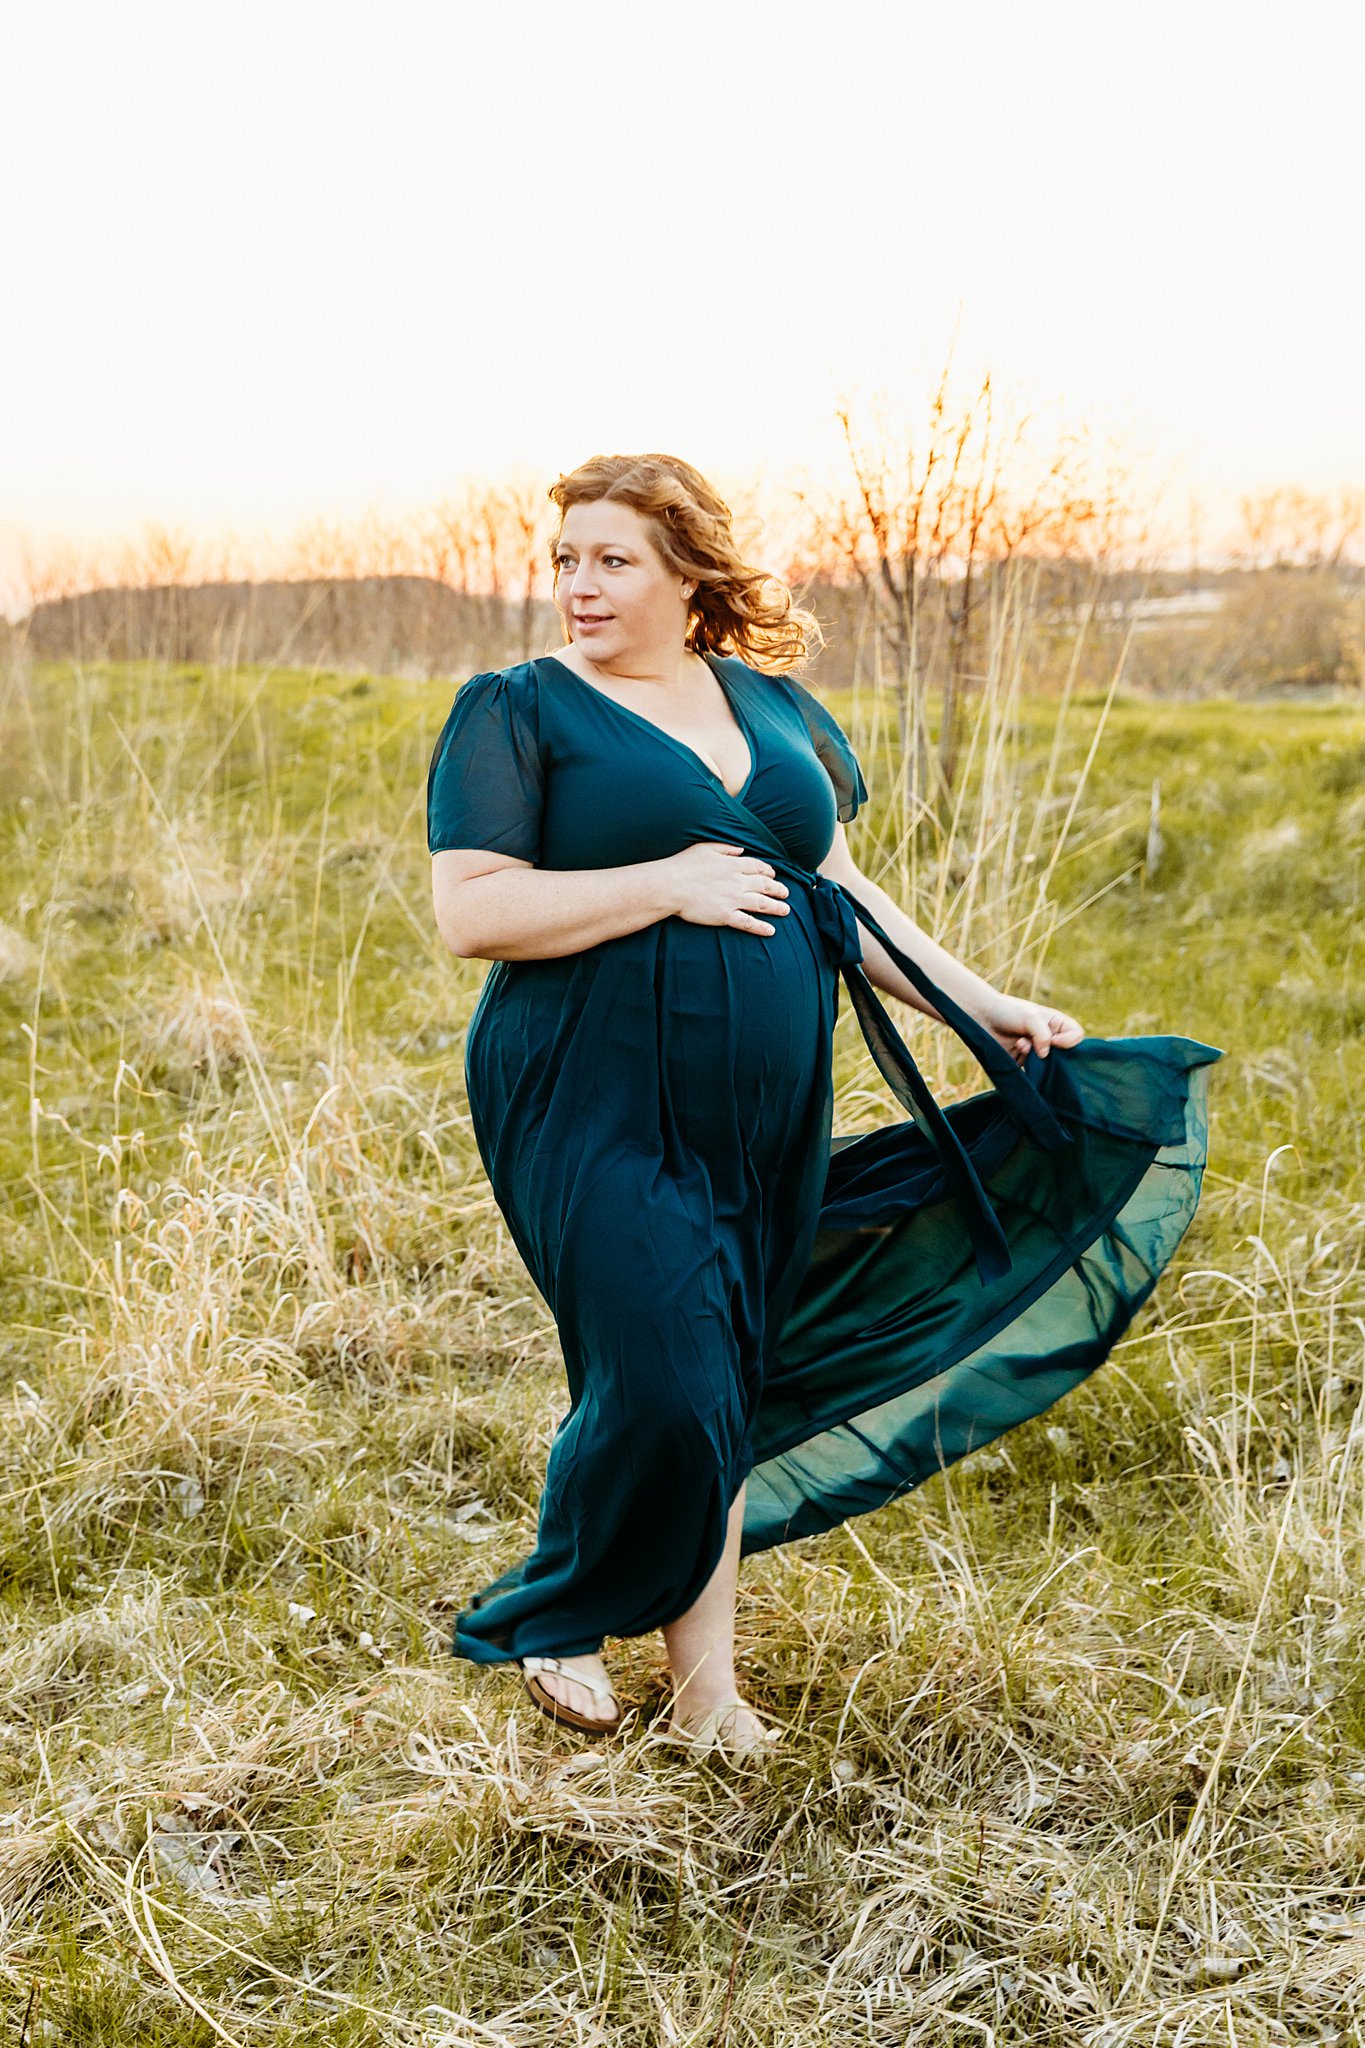 A pregnant woman walks through an open field at sunset while playing with her blue maternity dress Door County Massage